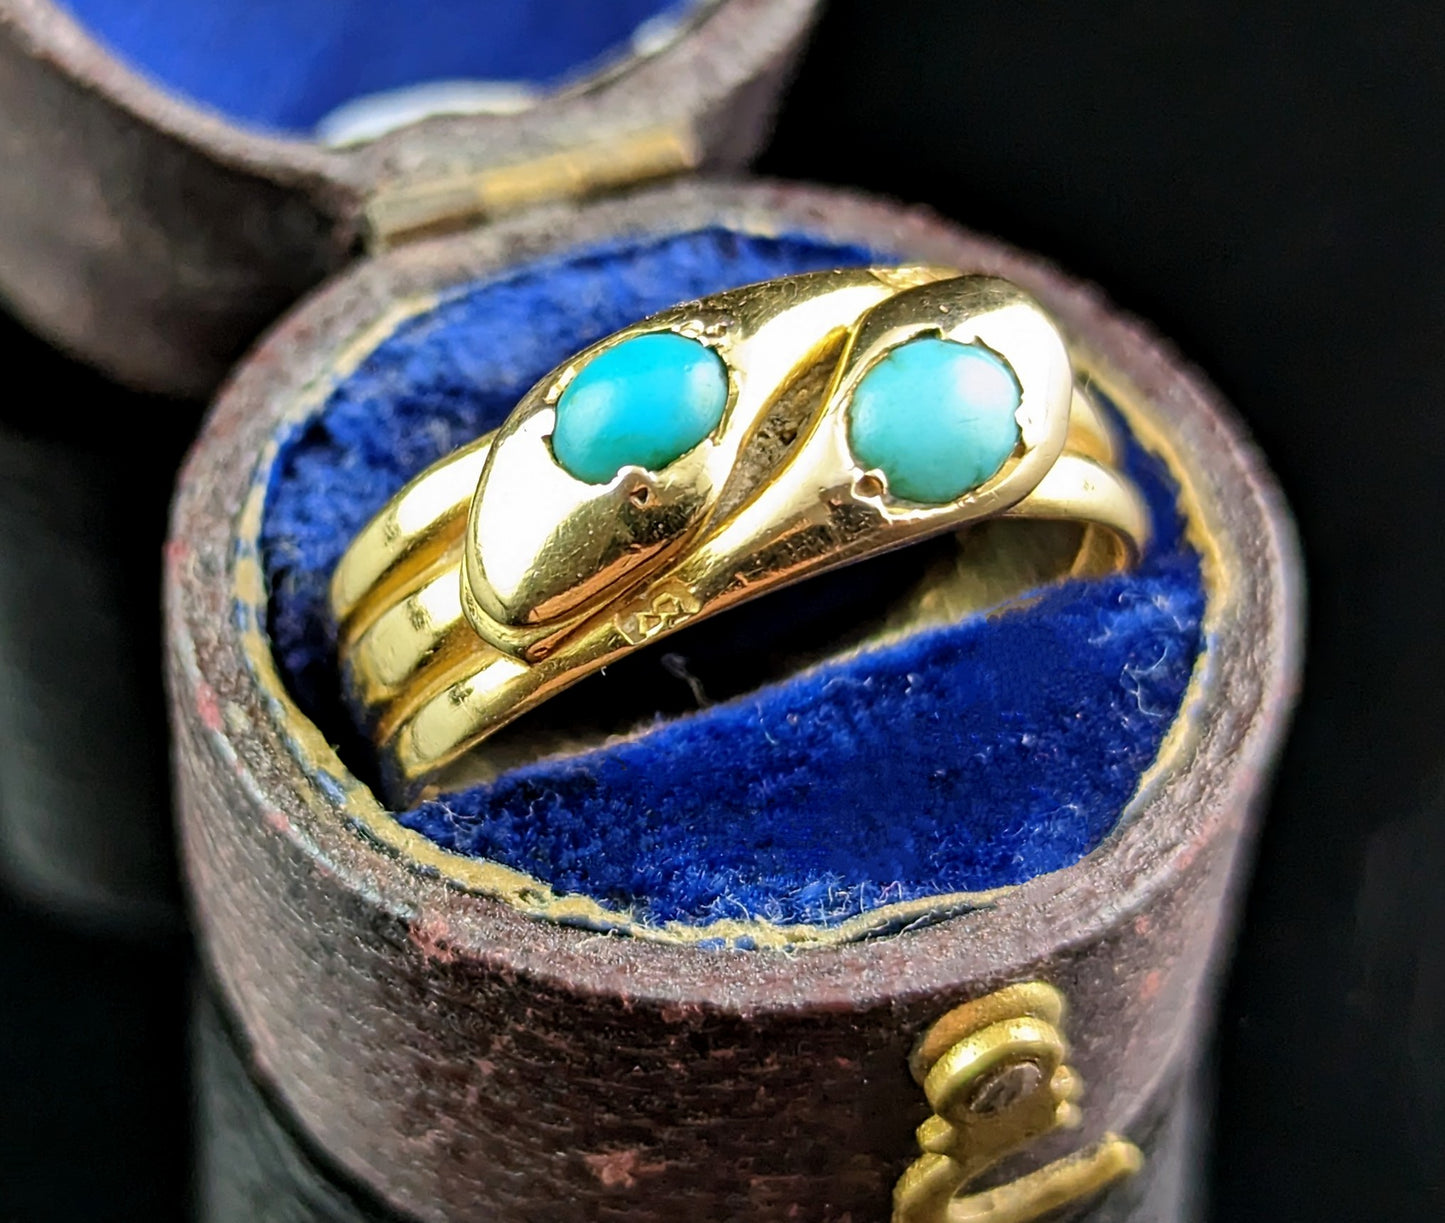 Antique 18ct gold double snake ring, Turquoise, Victorian